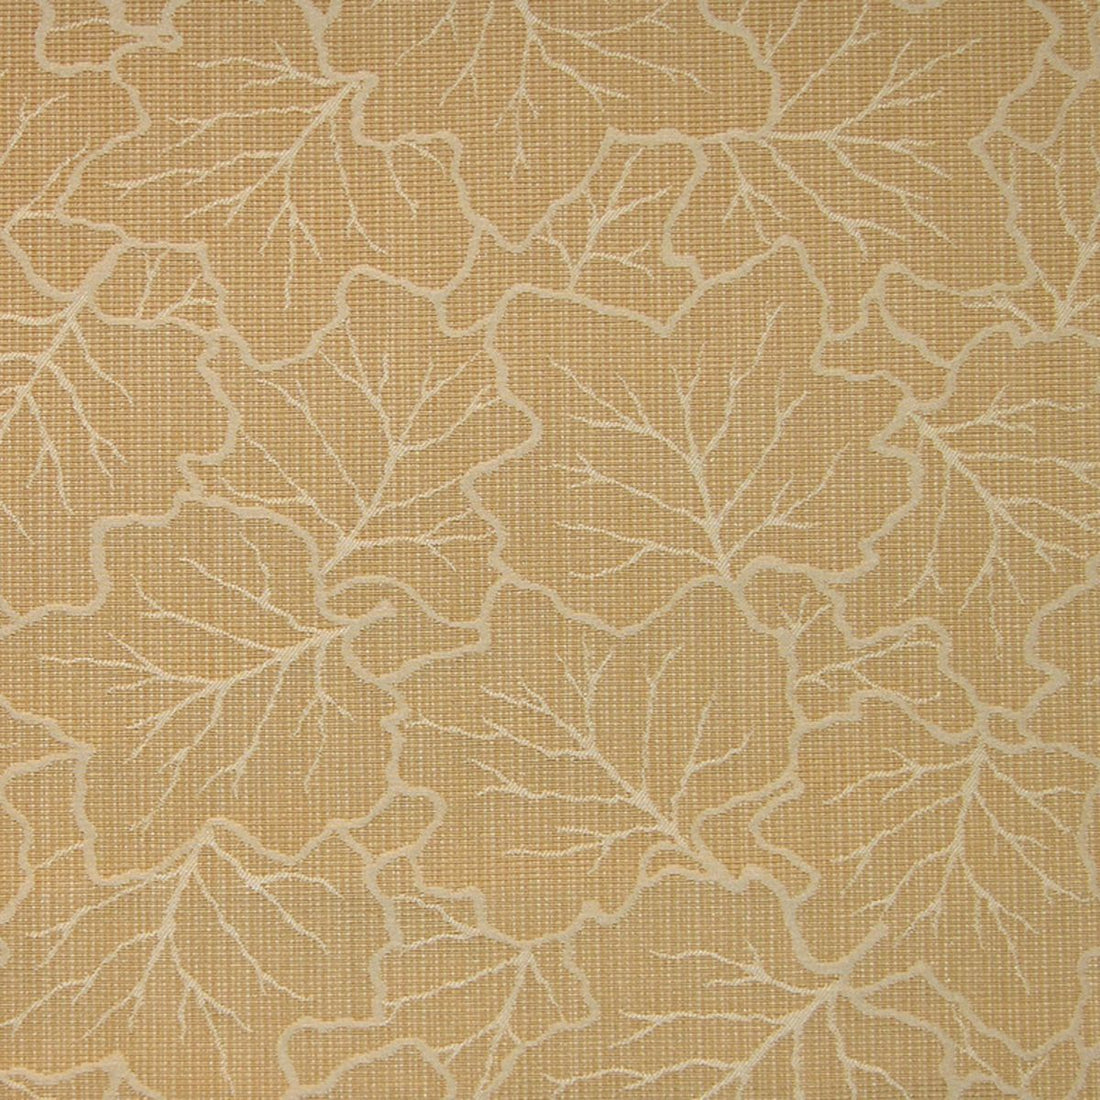 Maplewood fabric in gold color - pattern number TI 00021990 - by Scalamandre in the Old World Weavers collection